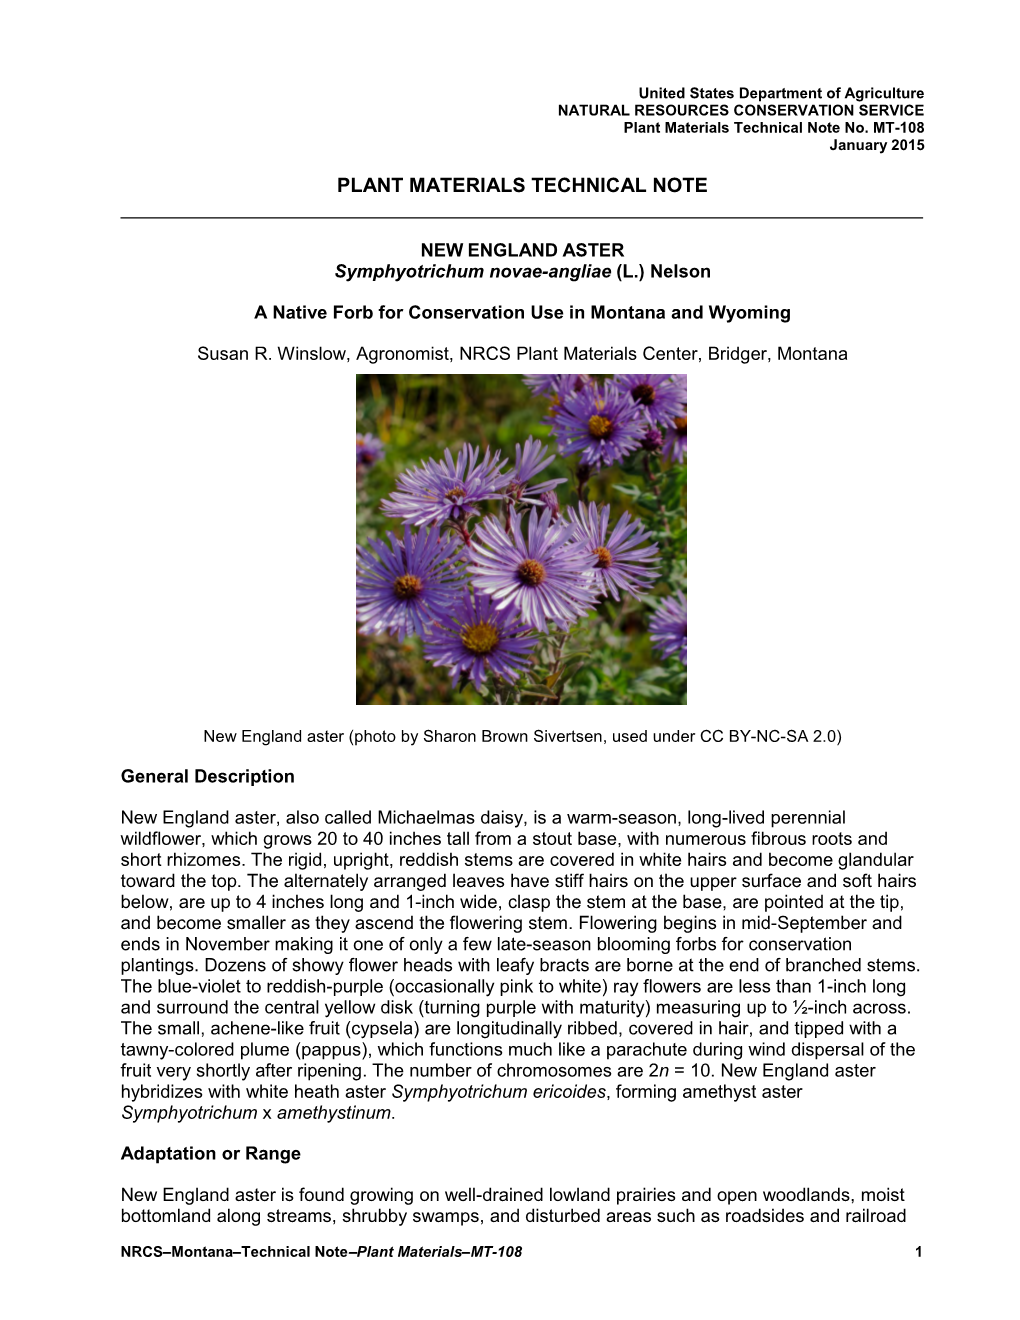 New England Aster: an Introduced Forb for Conservation Use In